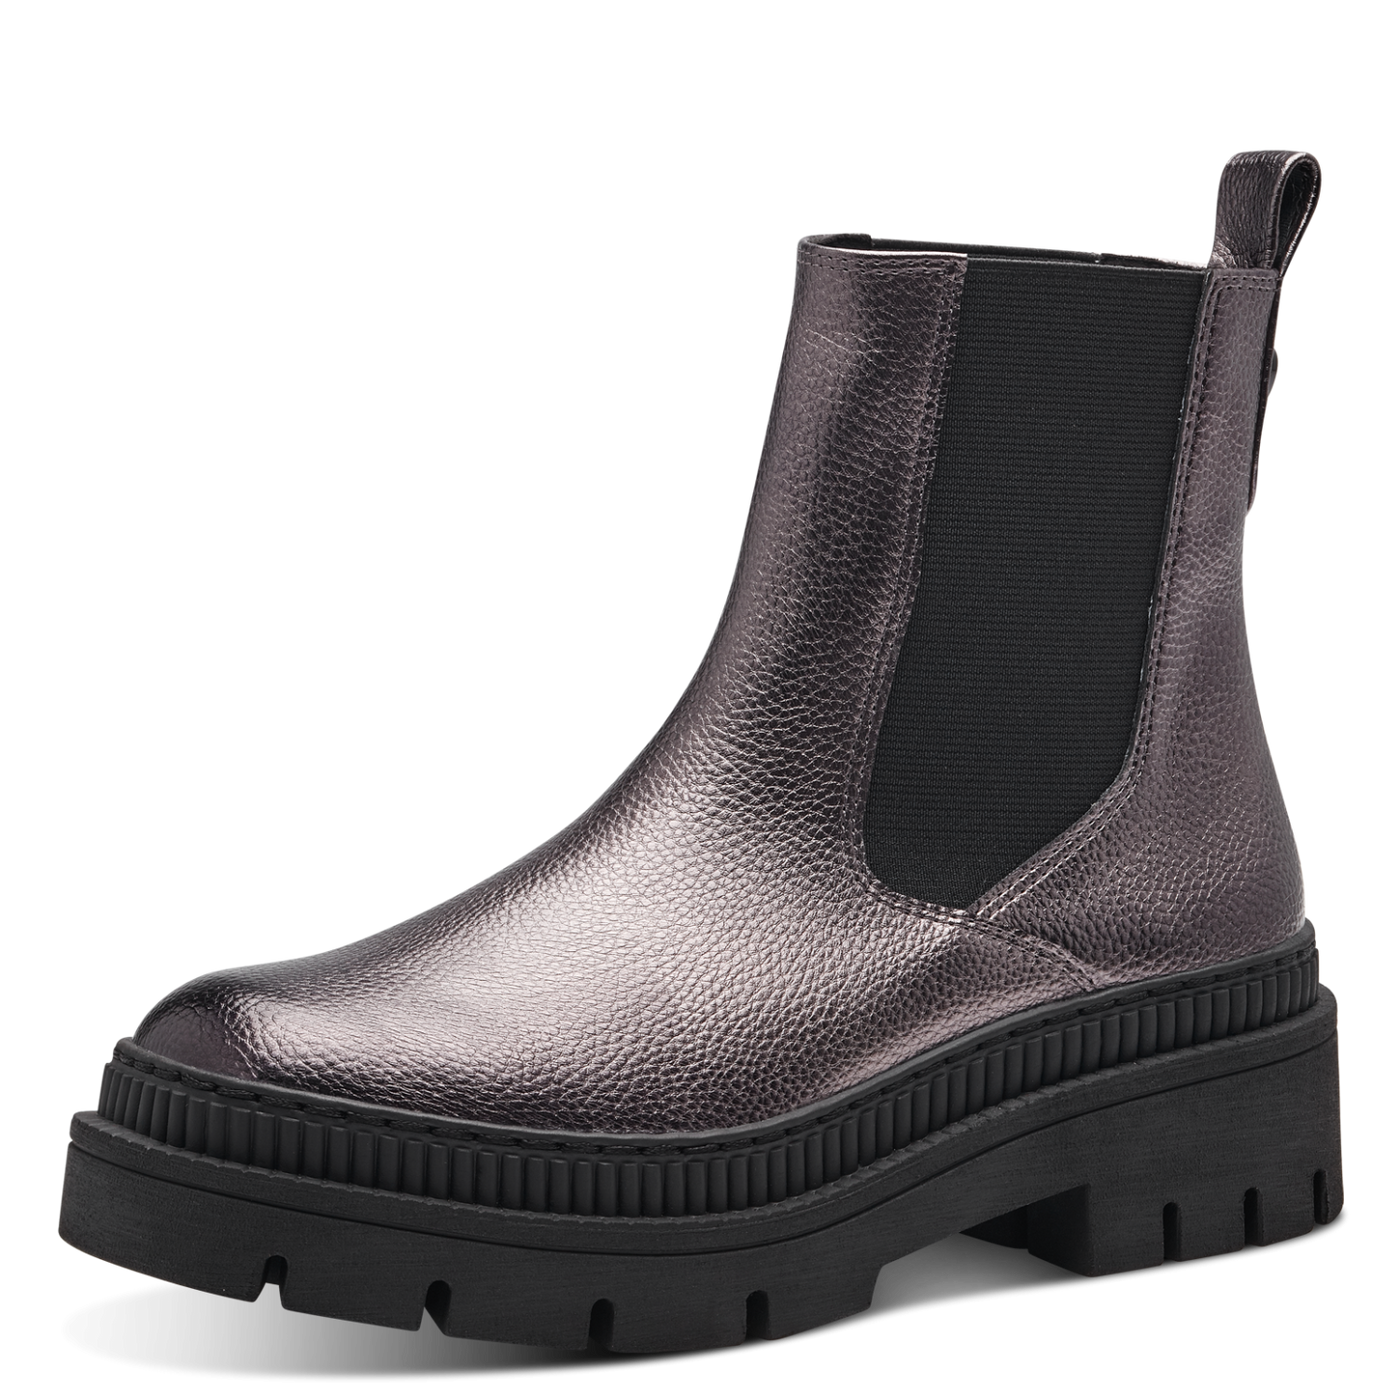 Women's Marco Tozzi pewter boots